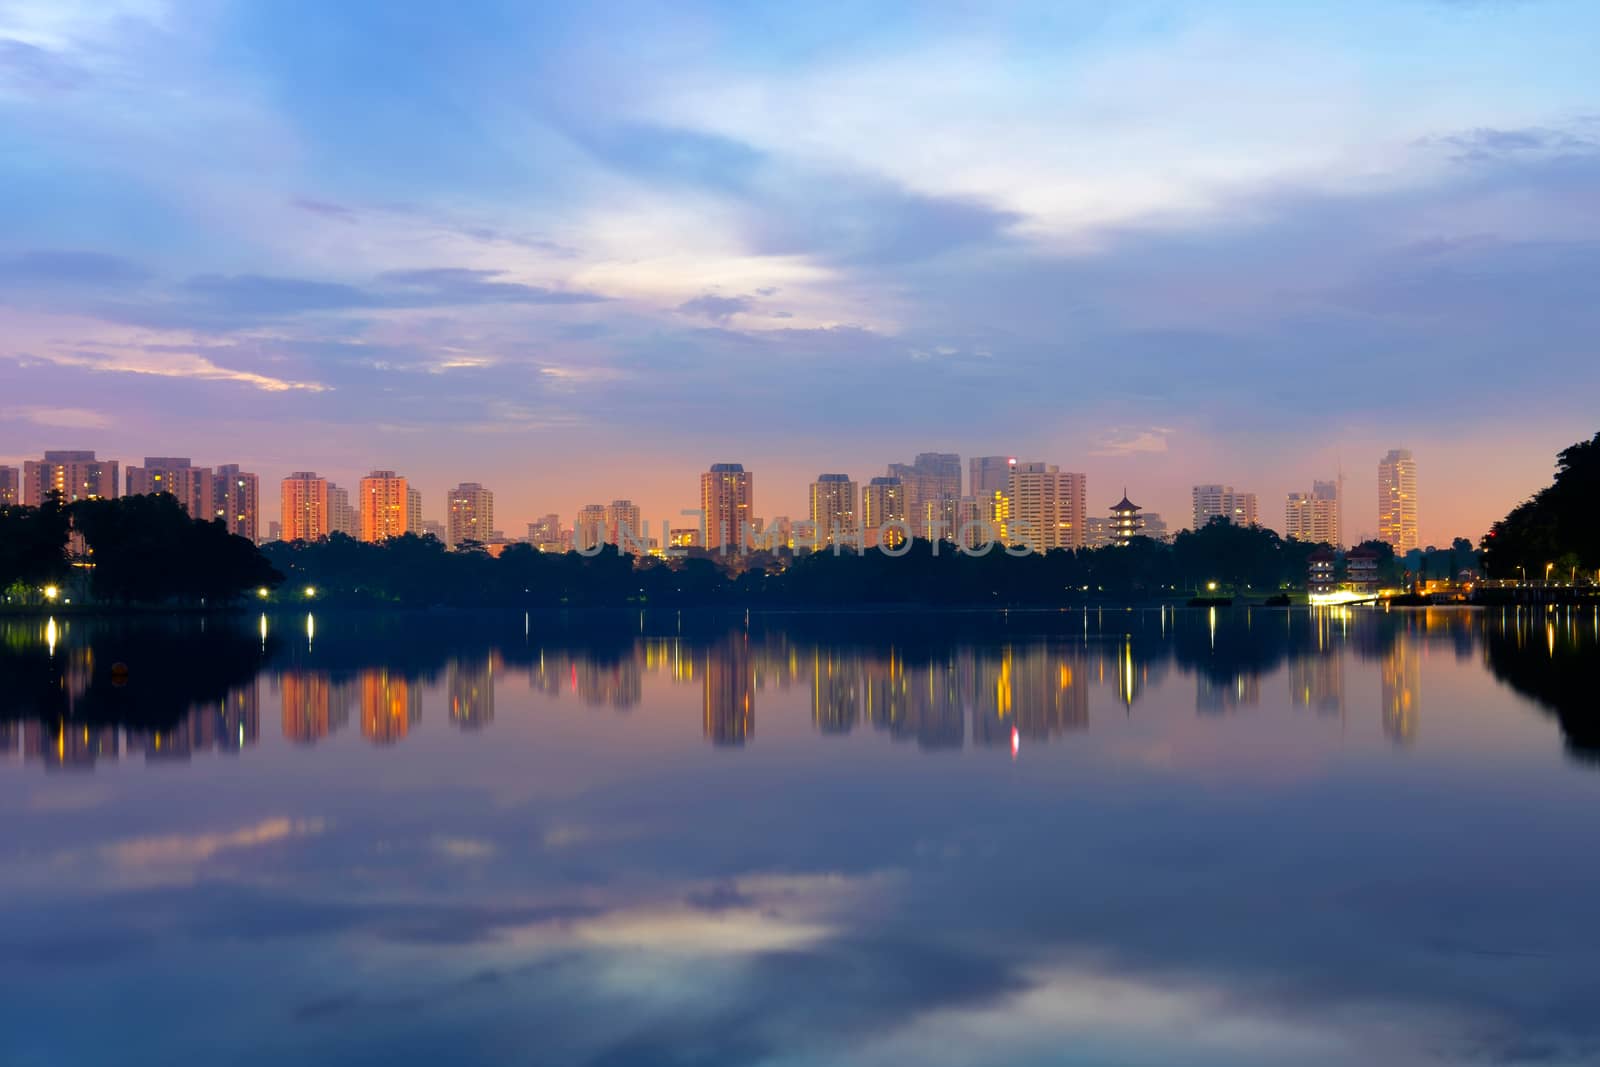 Reflection of building in the lake at sunrise at lakeside. Singa by rainfallsup